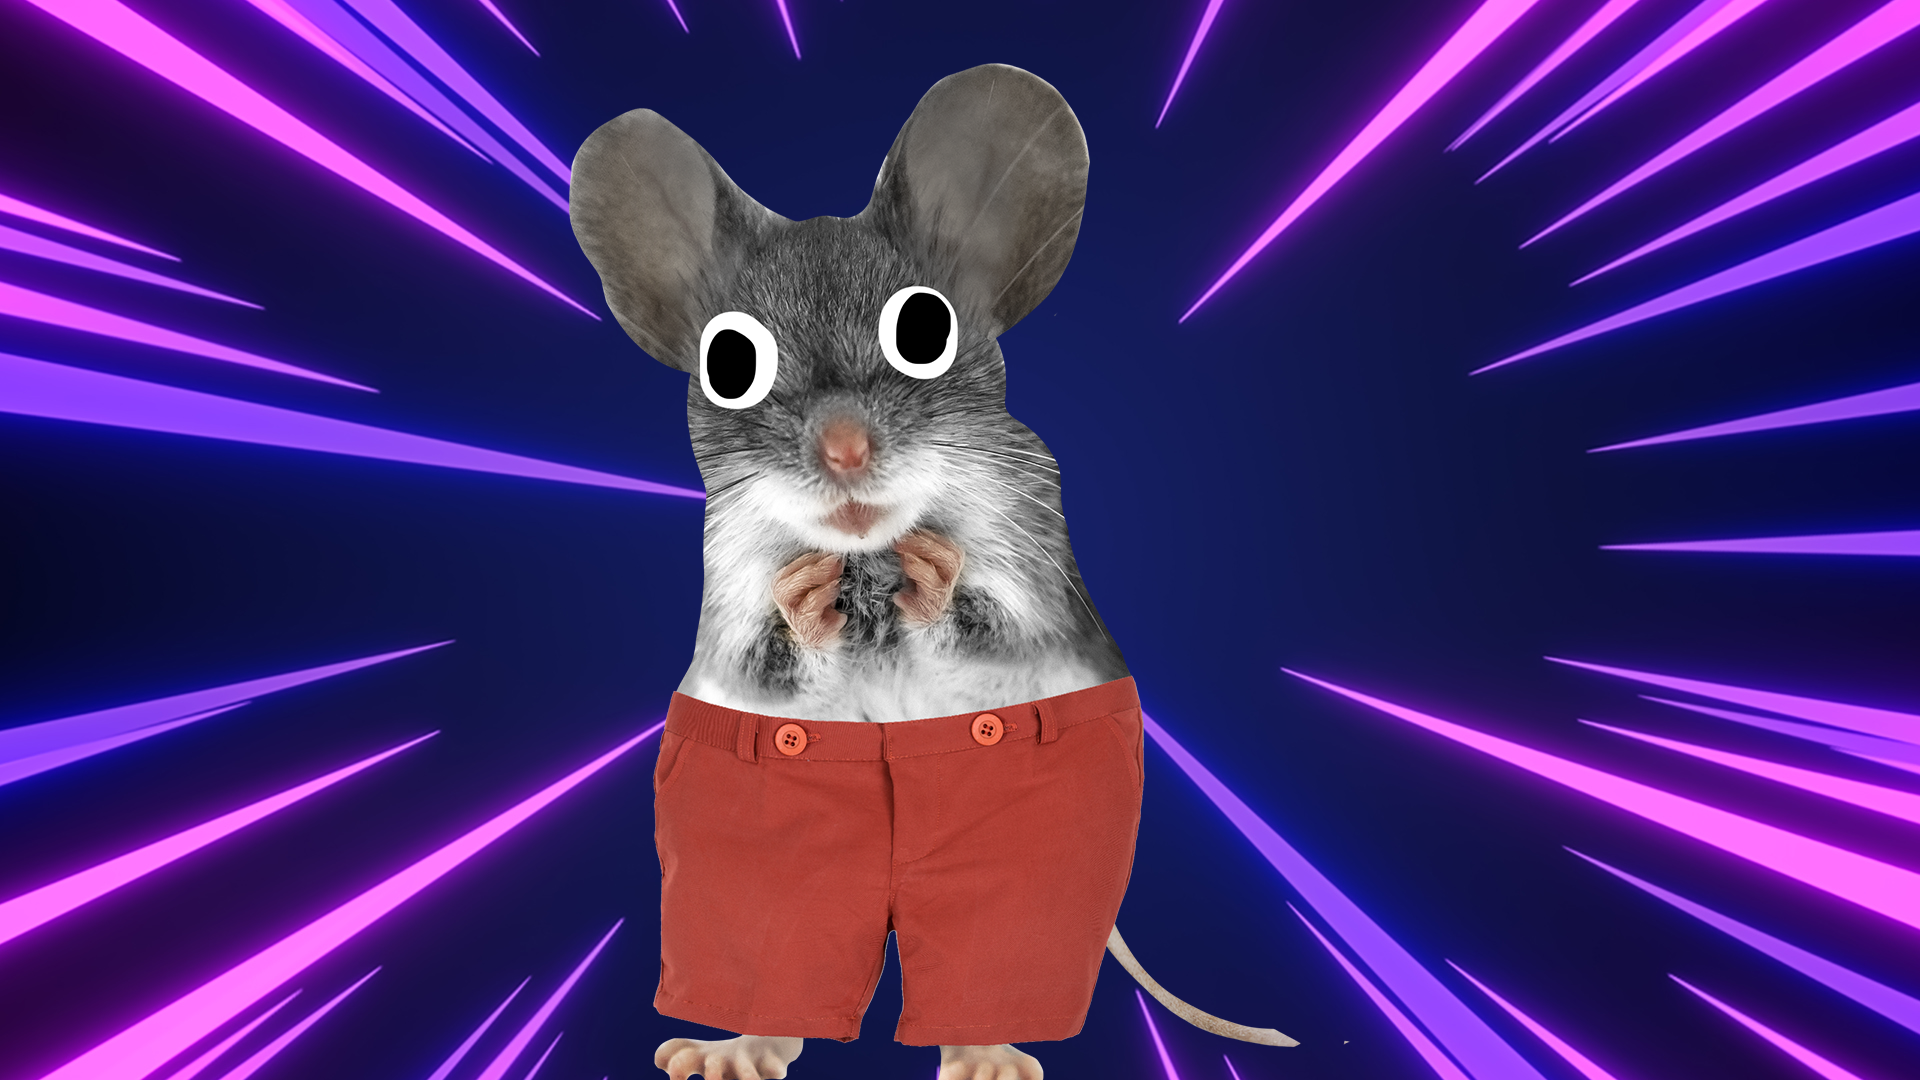 A mouse in red shorts